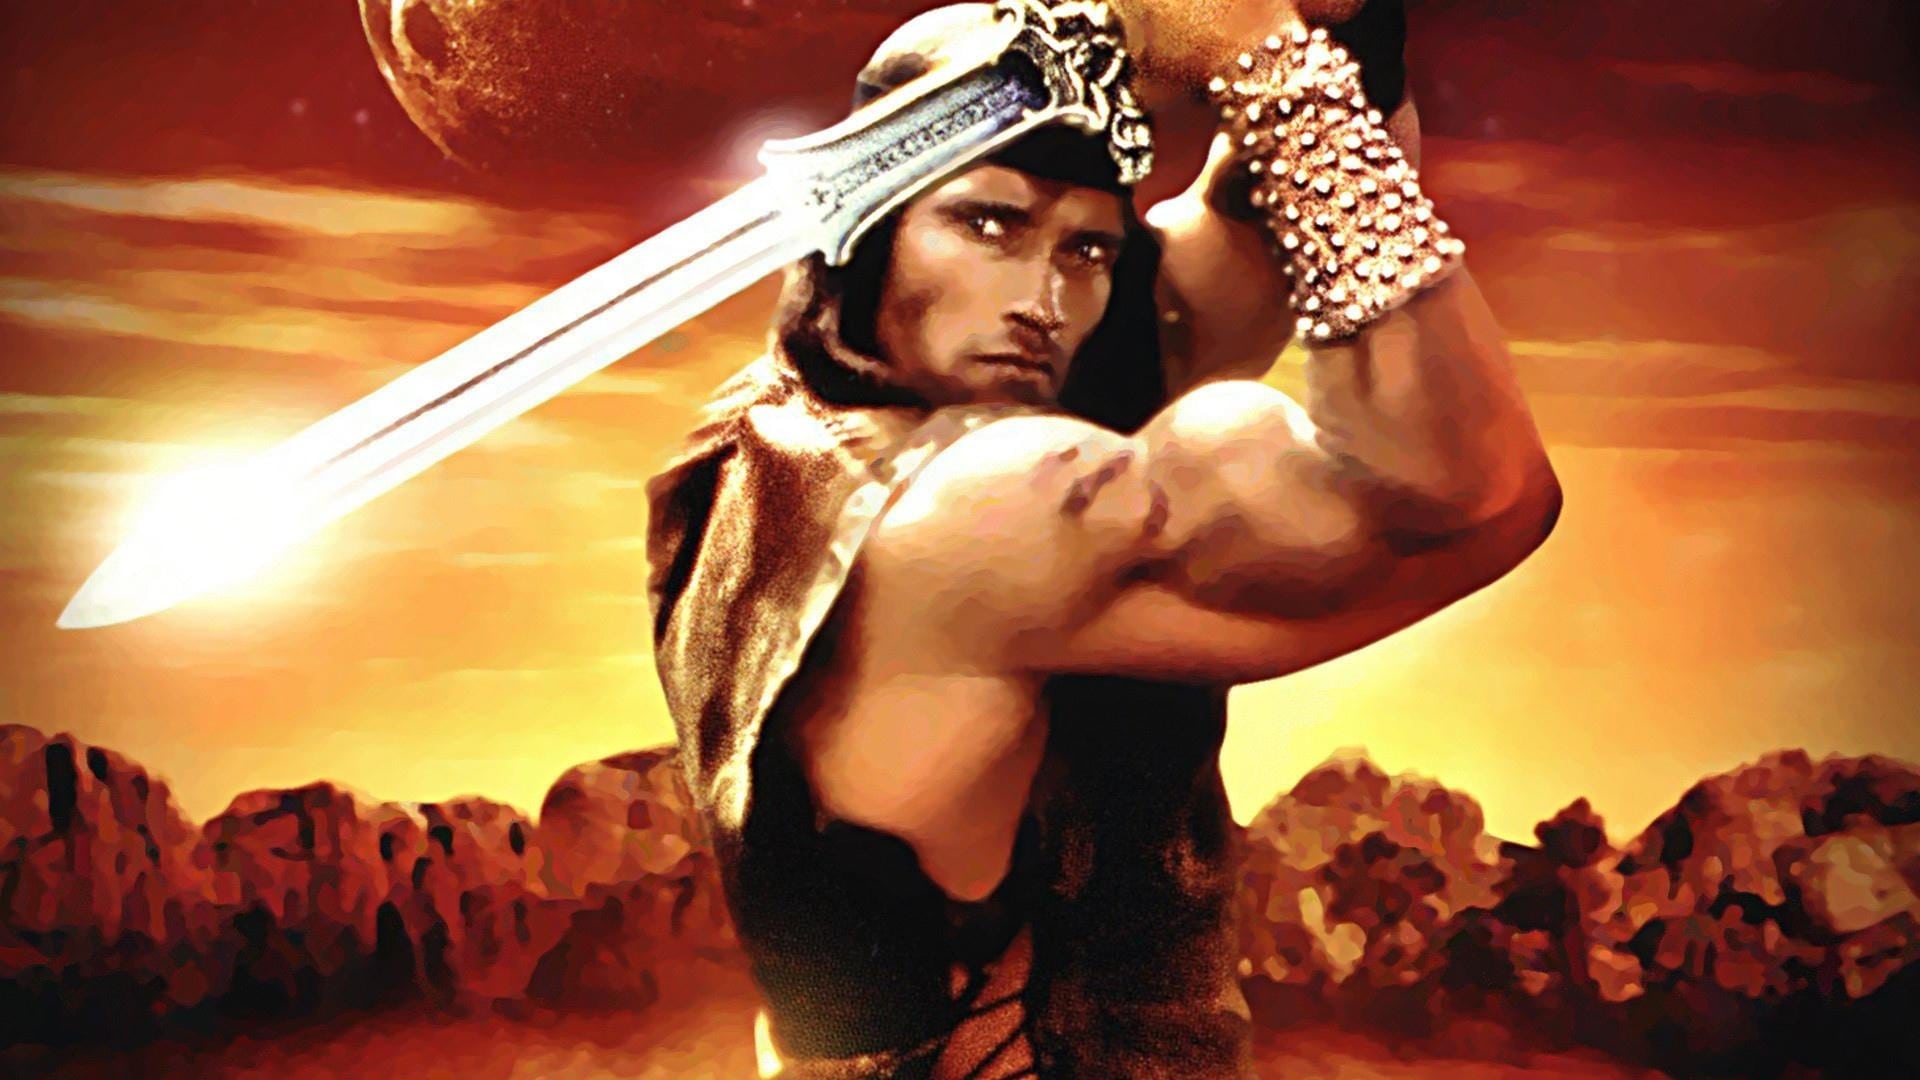 Conan the Destroyer, Backdrops, Film's archive, Behind-the-scenes, 1920x1080 Full HD Desktop